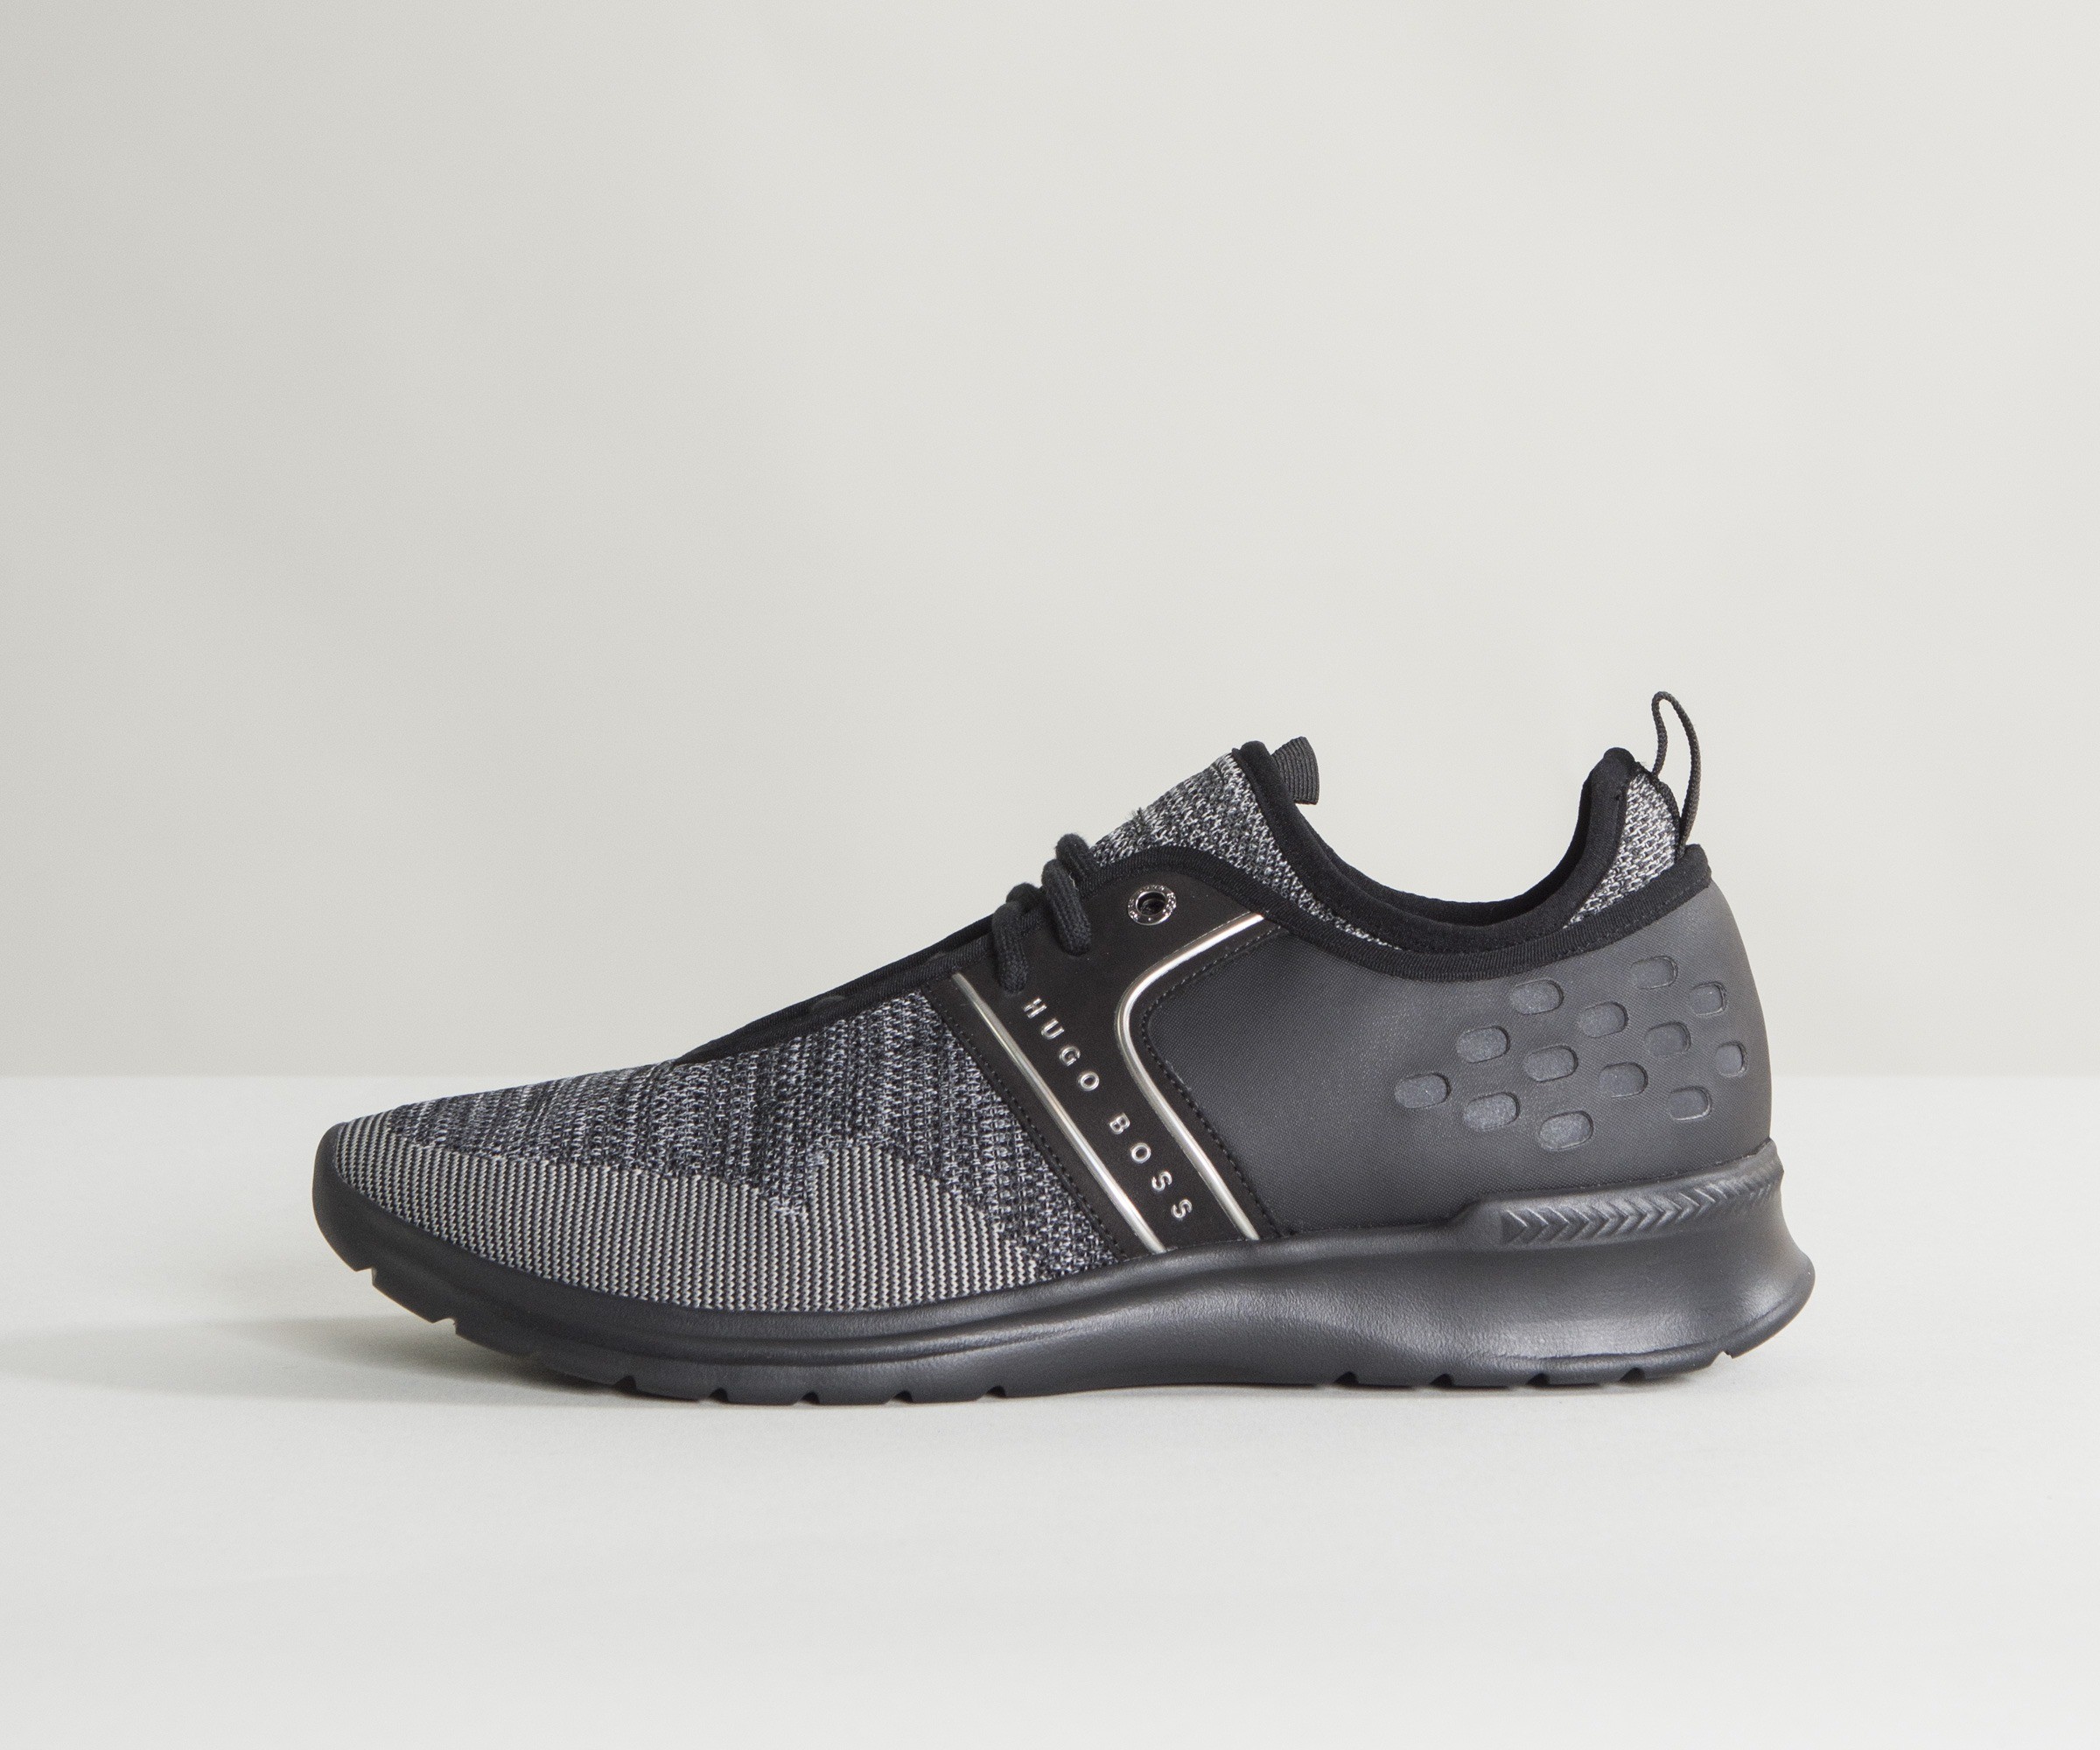 Ernest Shackleton Serena Tilladelse Hugo Boss Green 'Extreme_Runn_Sykn' Lace-Up Trainers With Knitted Uppers  Dark Grey